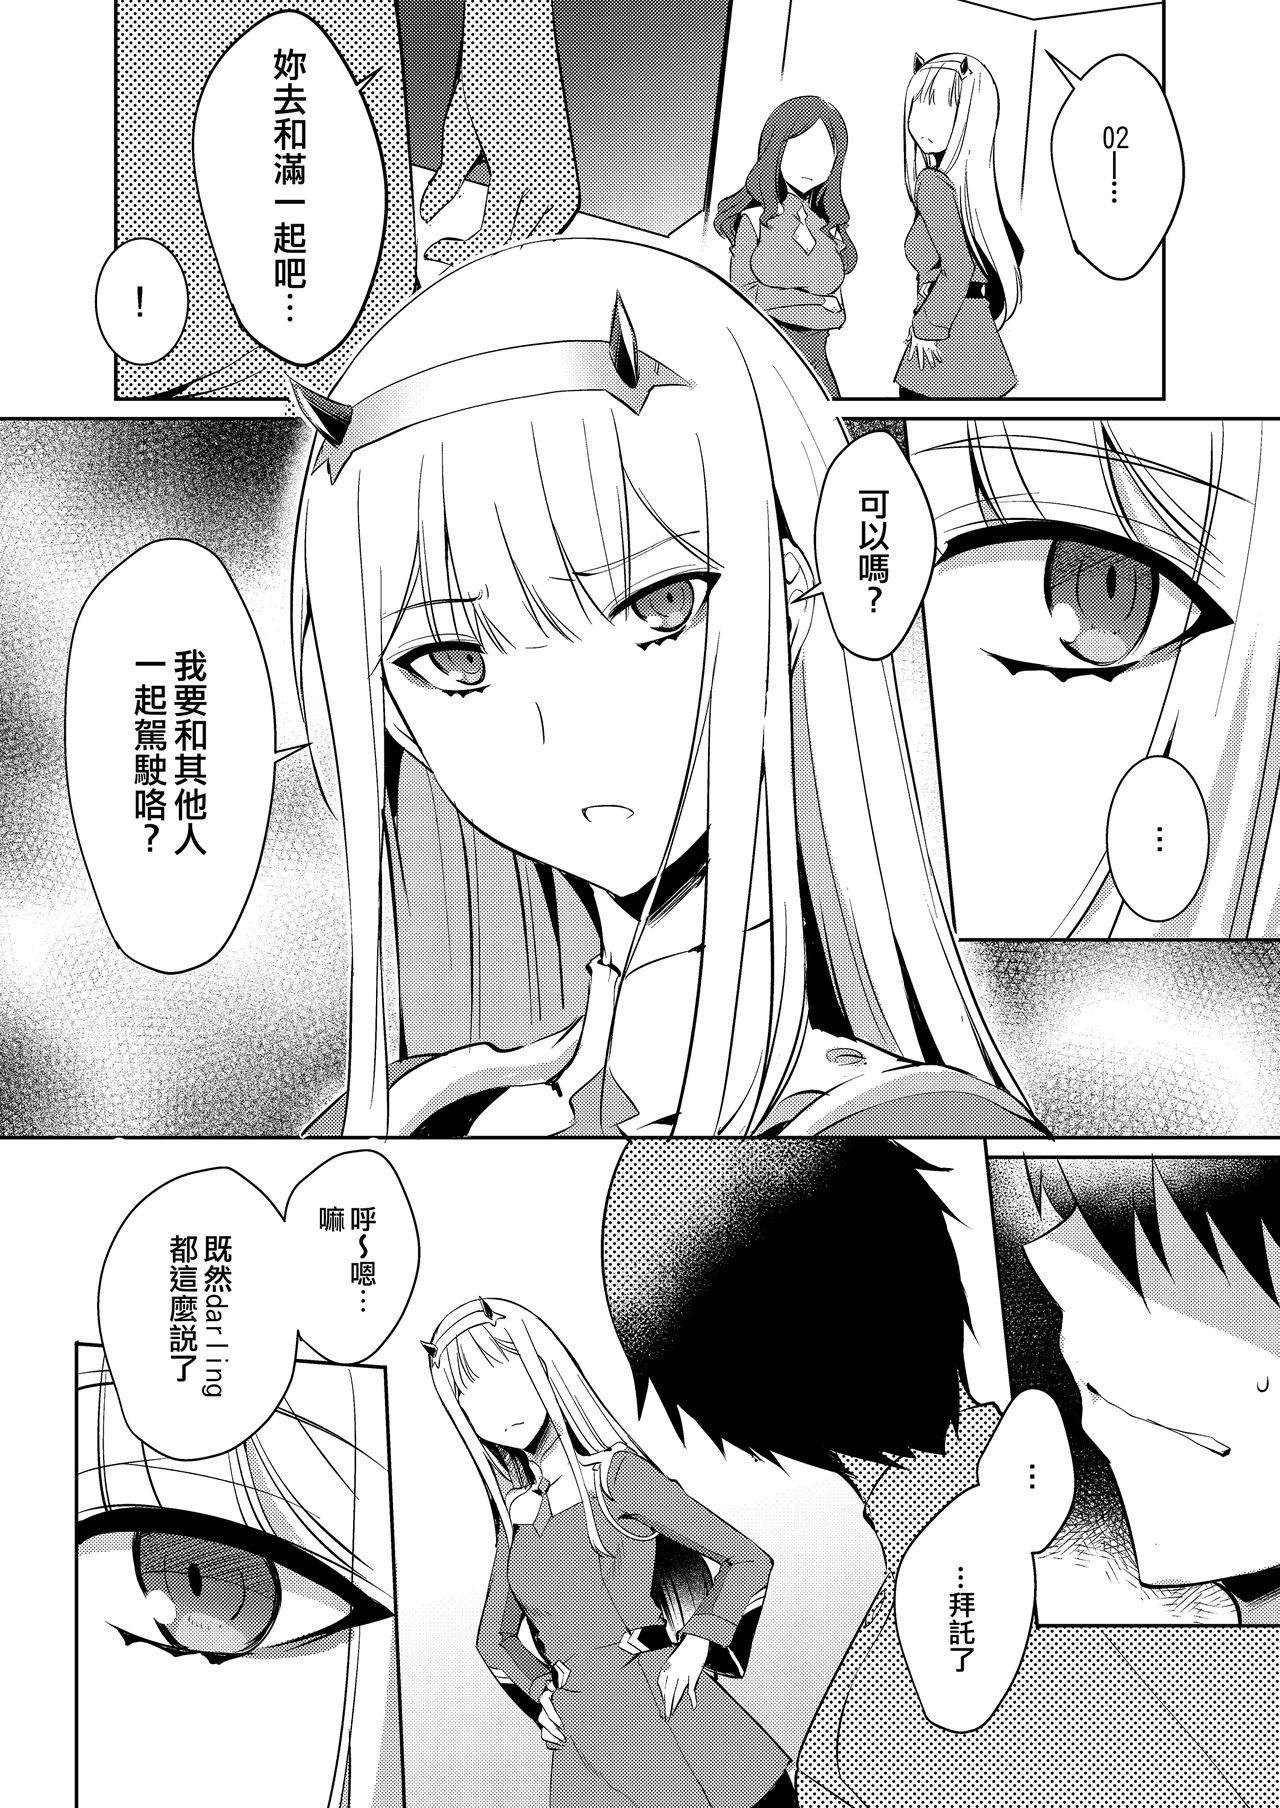 Exotic Mitsuru in the Zero Two - Darling in the franxx Realamateur - Page 5